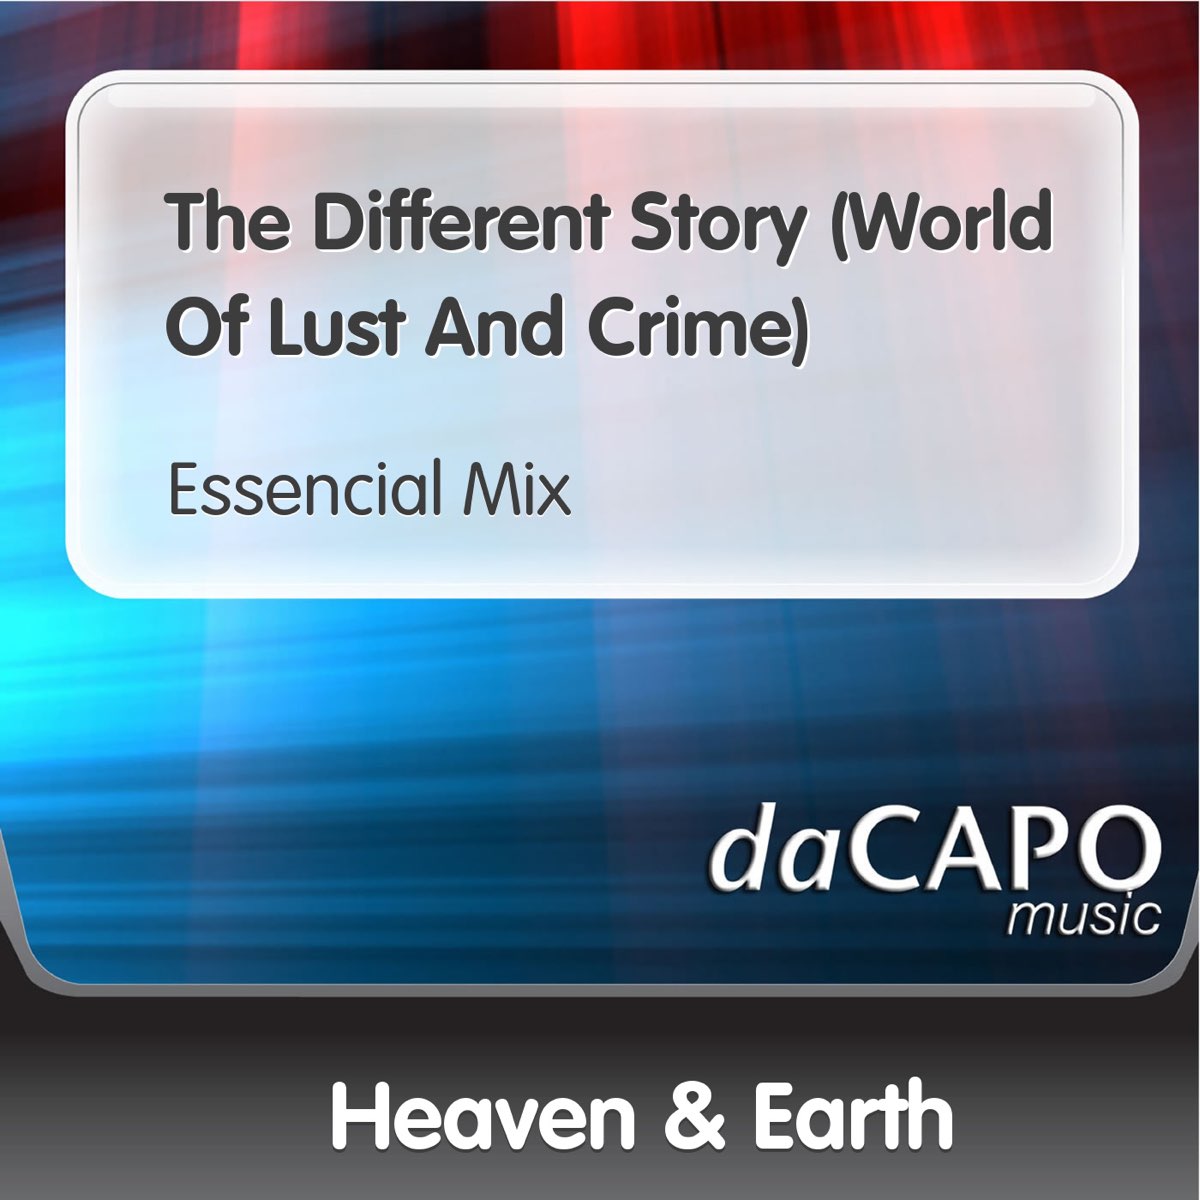 The Different Story World Of Lust And Crime Single By Heaven Earth On Apple Music